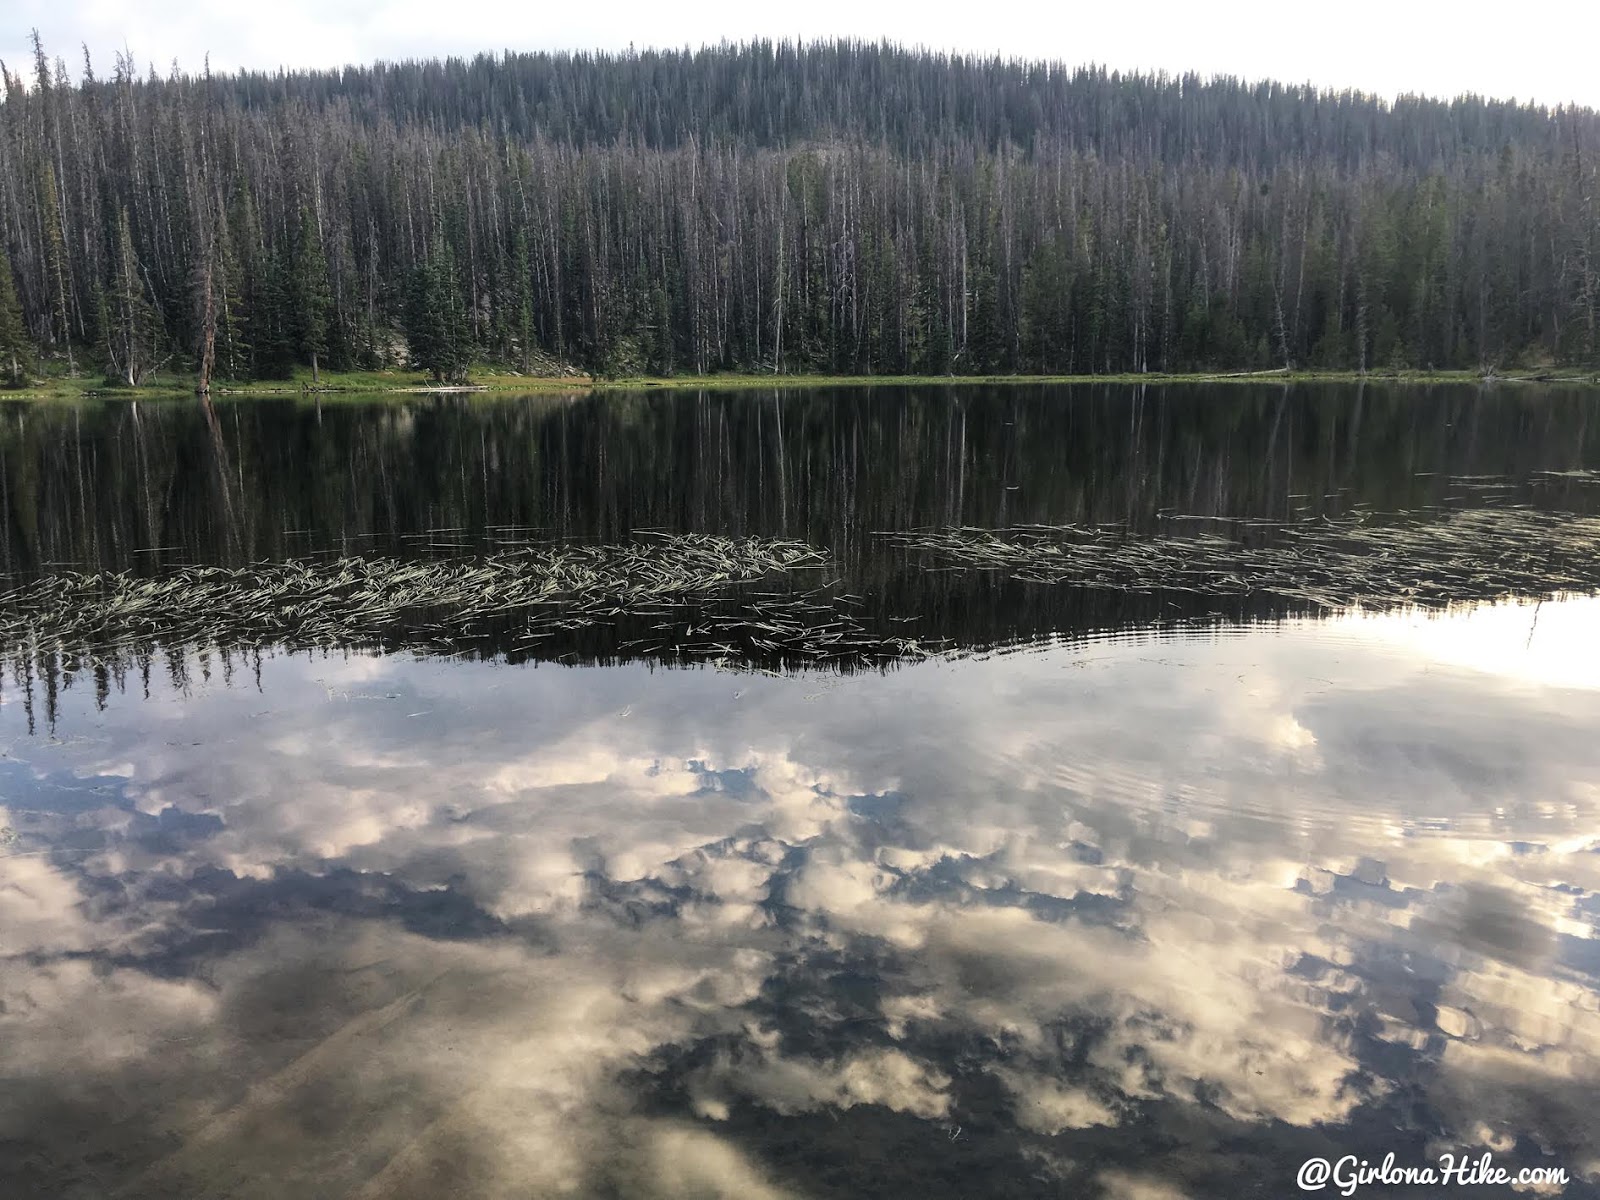 Backpacking to Round, Sand, & Fish Lakes, Uintas